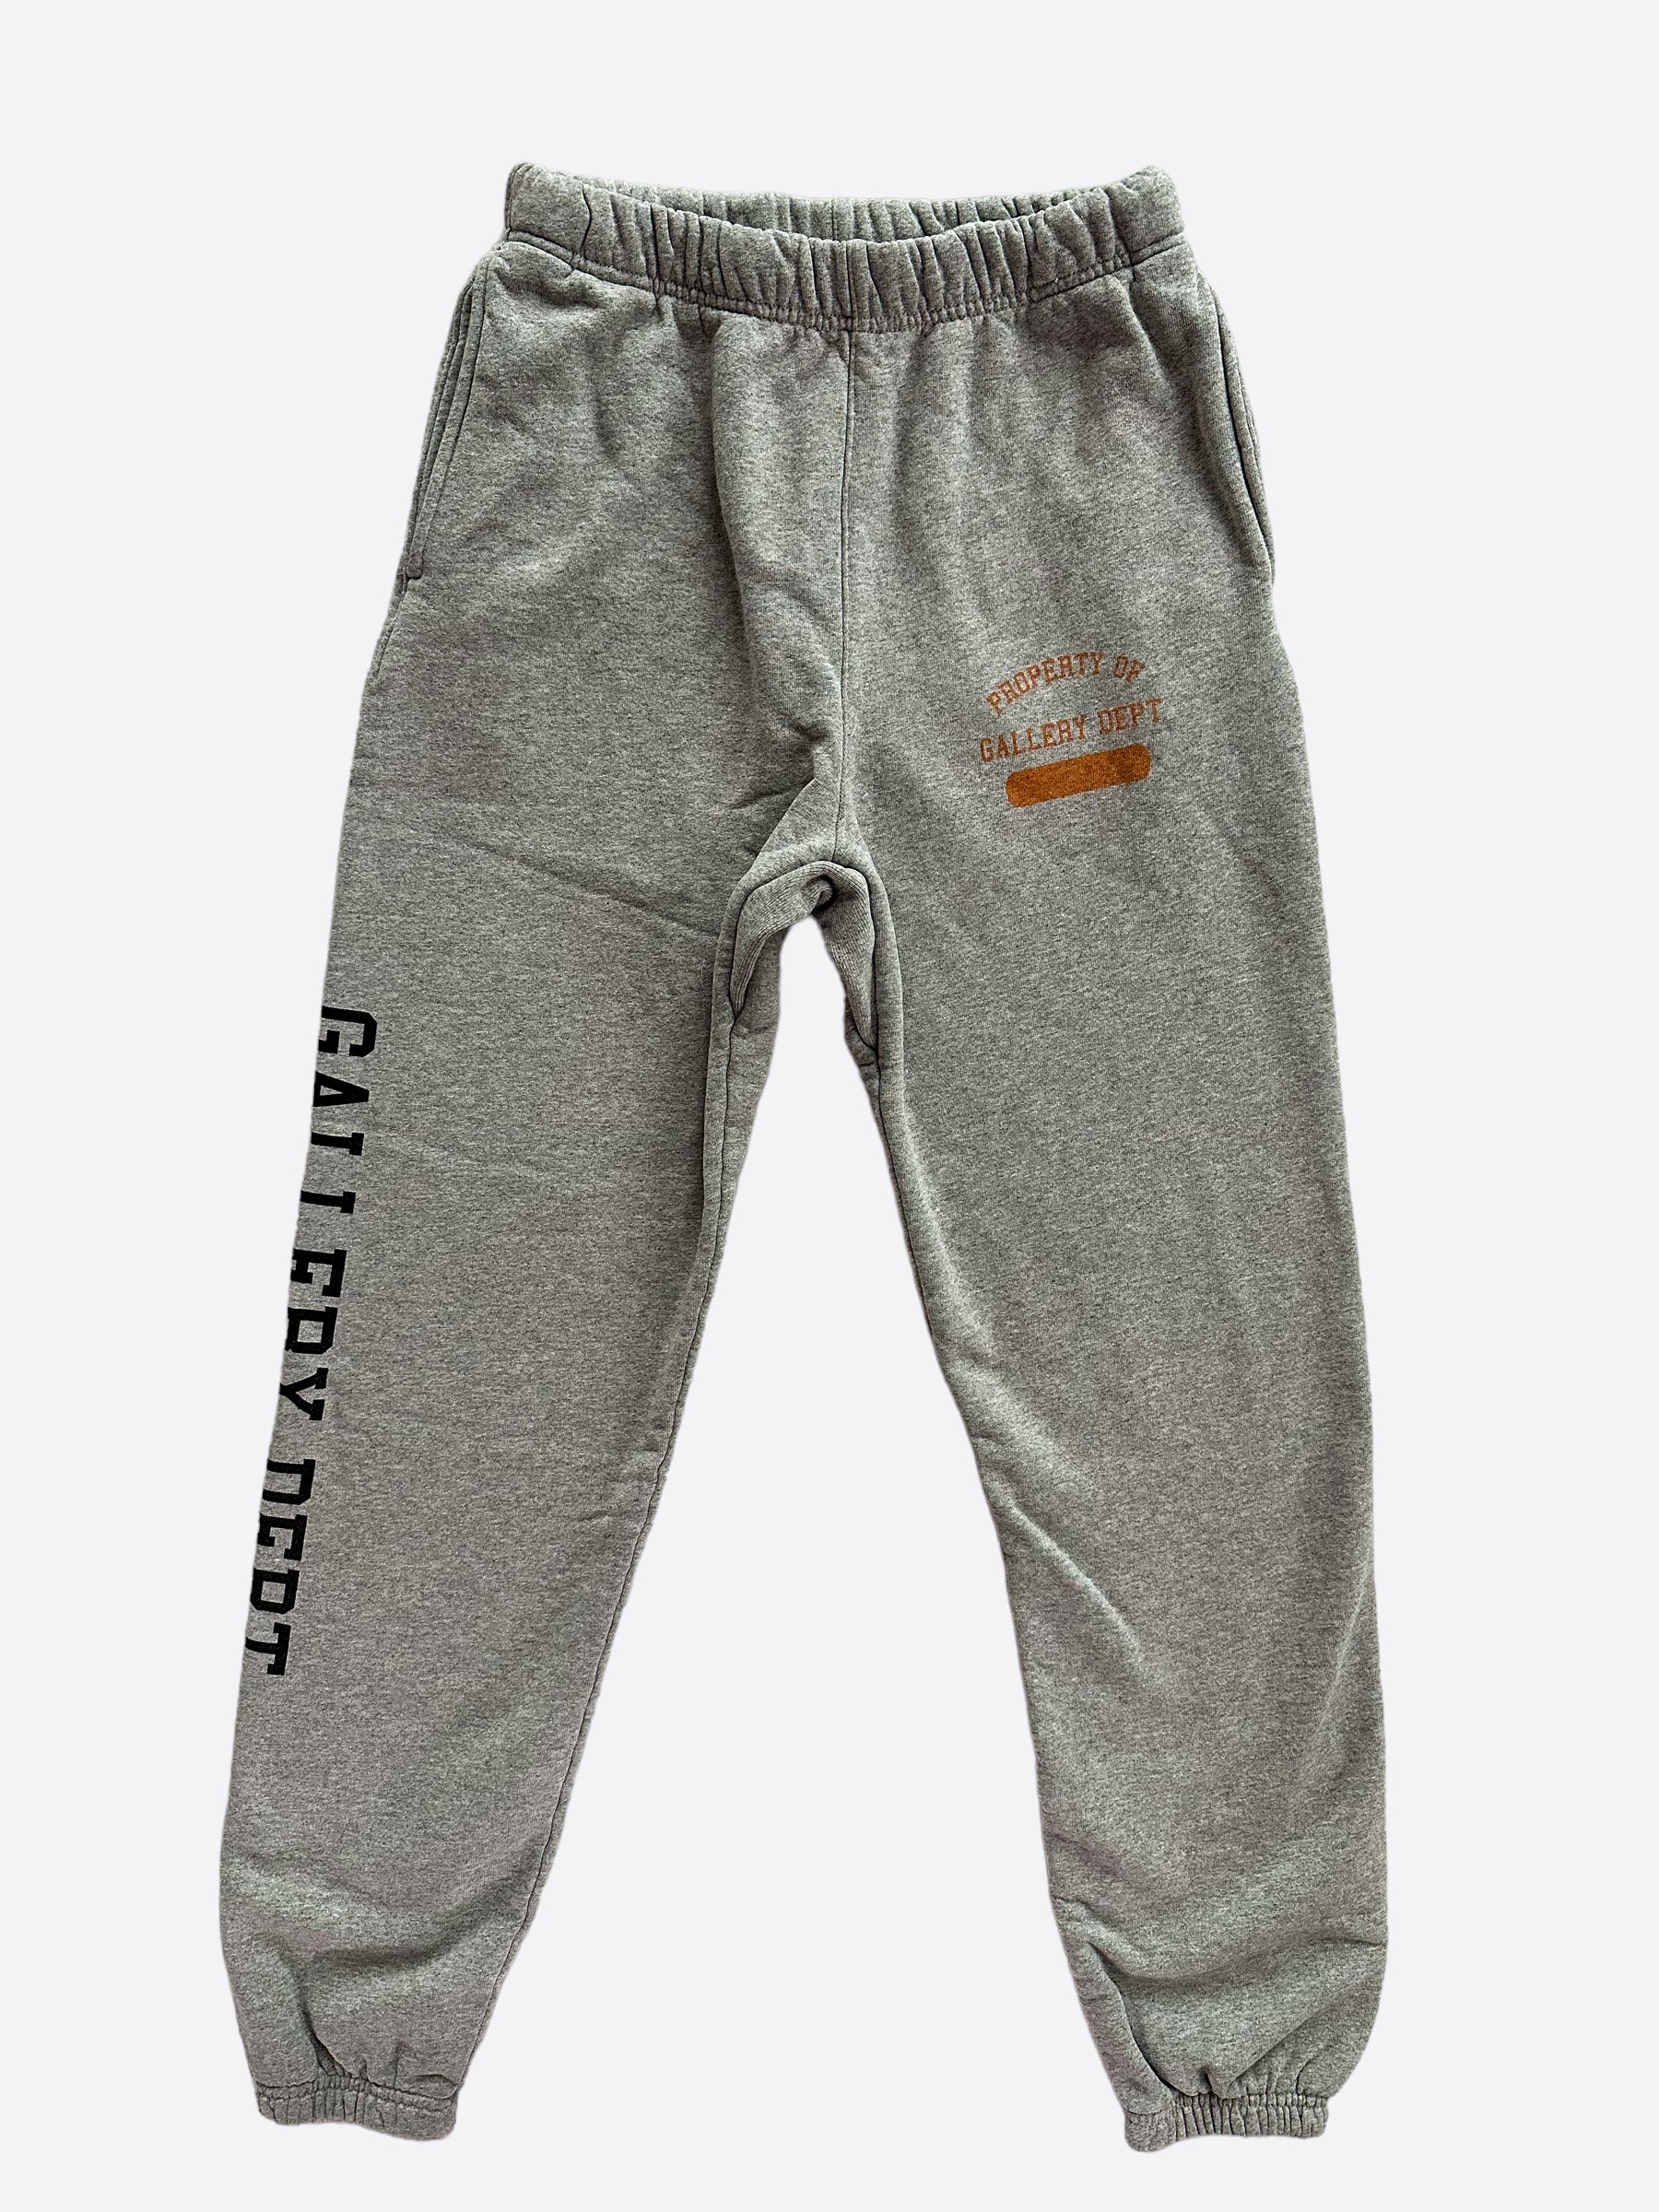 Gallery Dept Grey Property Of Gallery Dept Sweatpants – Savonches